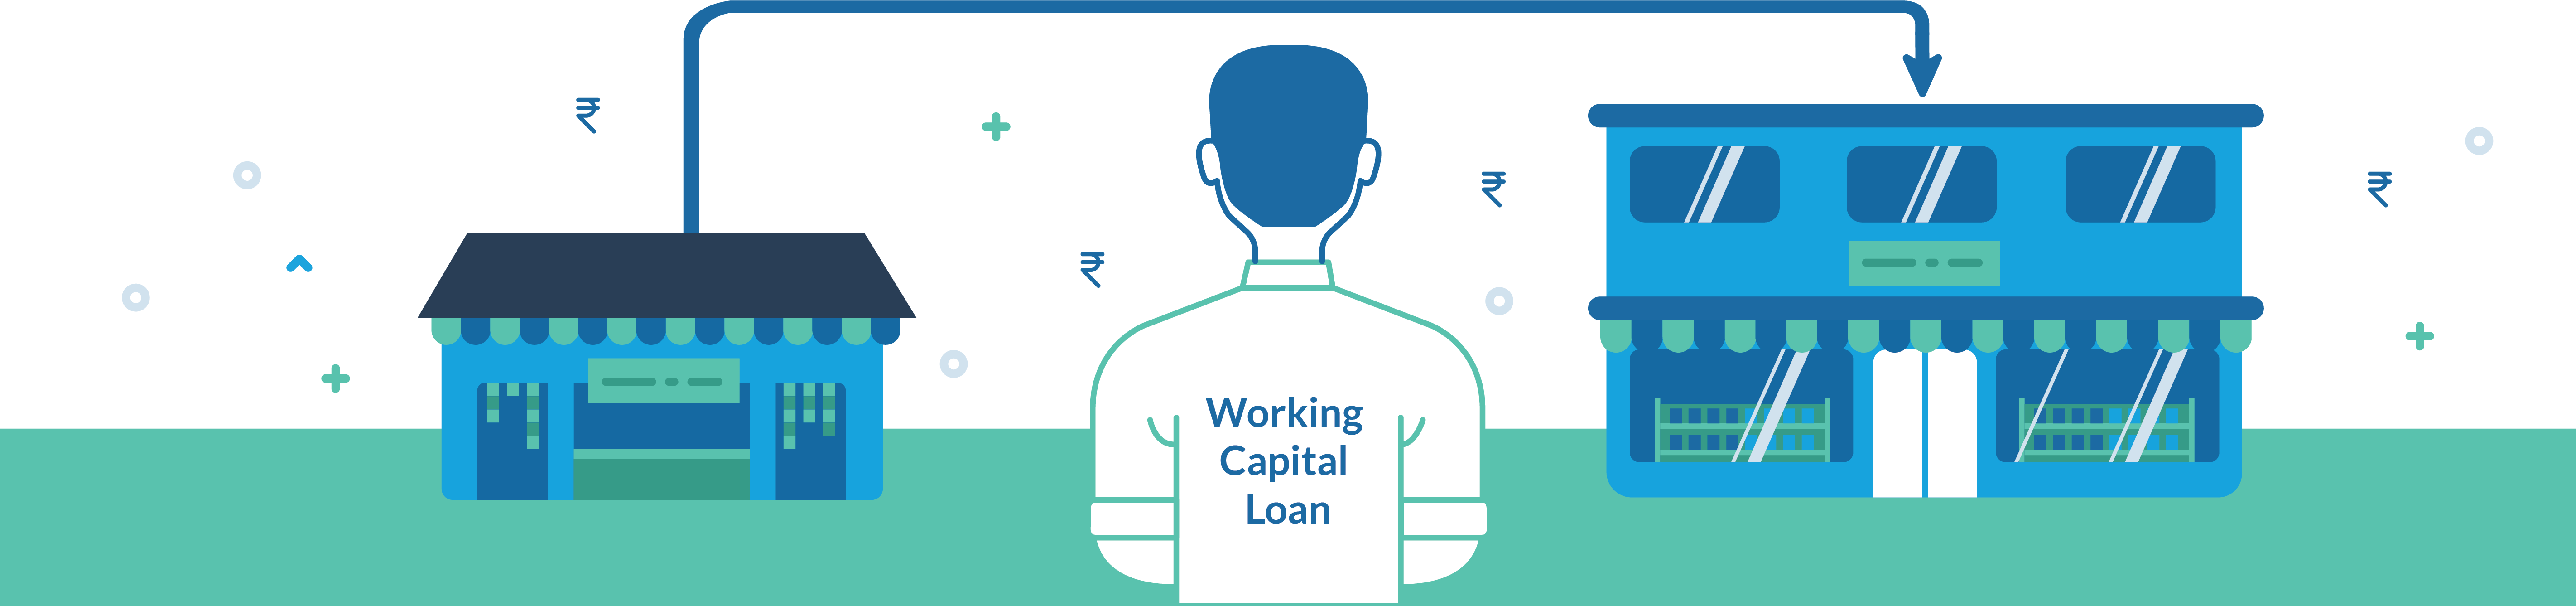 Loanmeet Provides Working Capital Loans To Business - Working Capital (5686x1346)